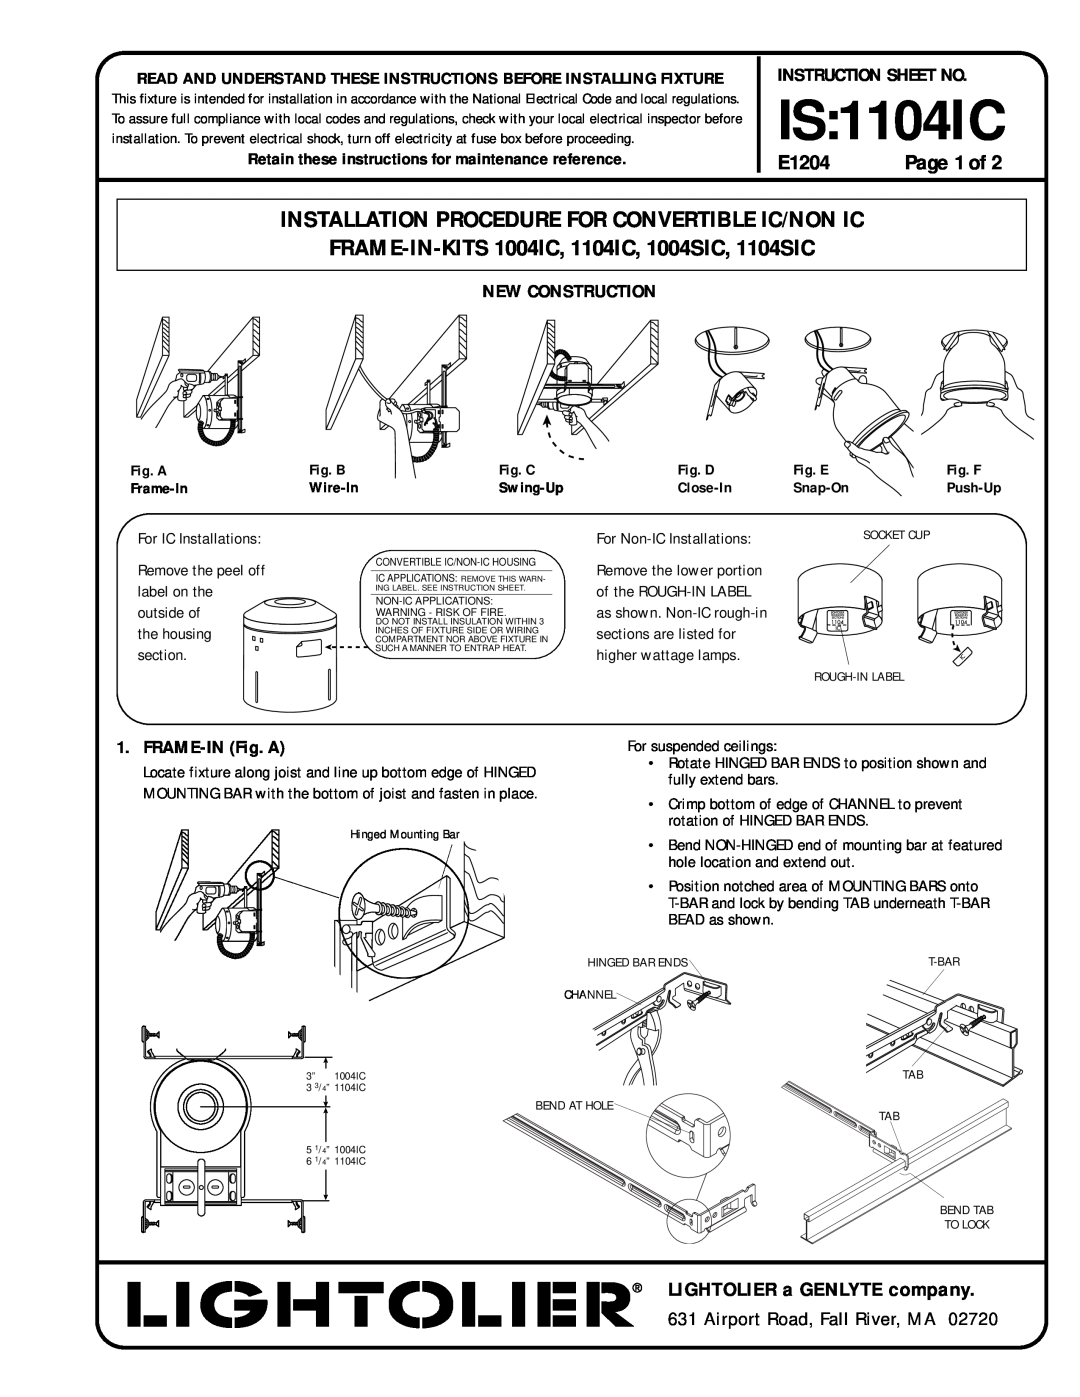 Lightolier instruction sheet IS 1104IC, E1204, LIGHTOLIER a GENLYTE company, Airport Road, Fall River, MA, Page 1 of 